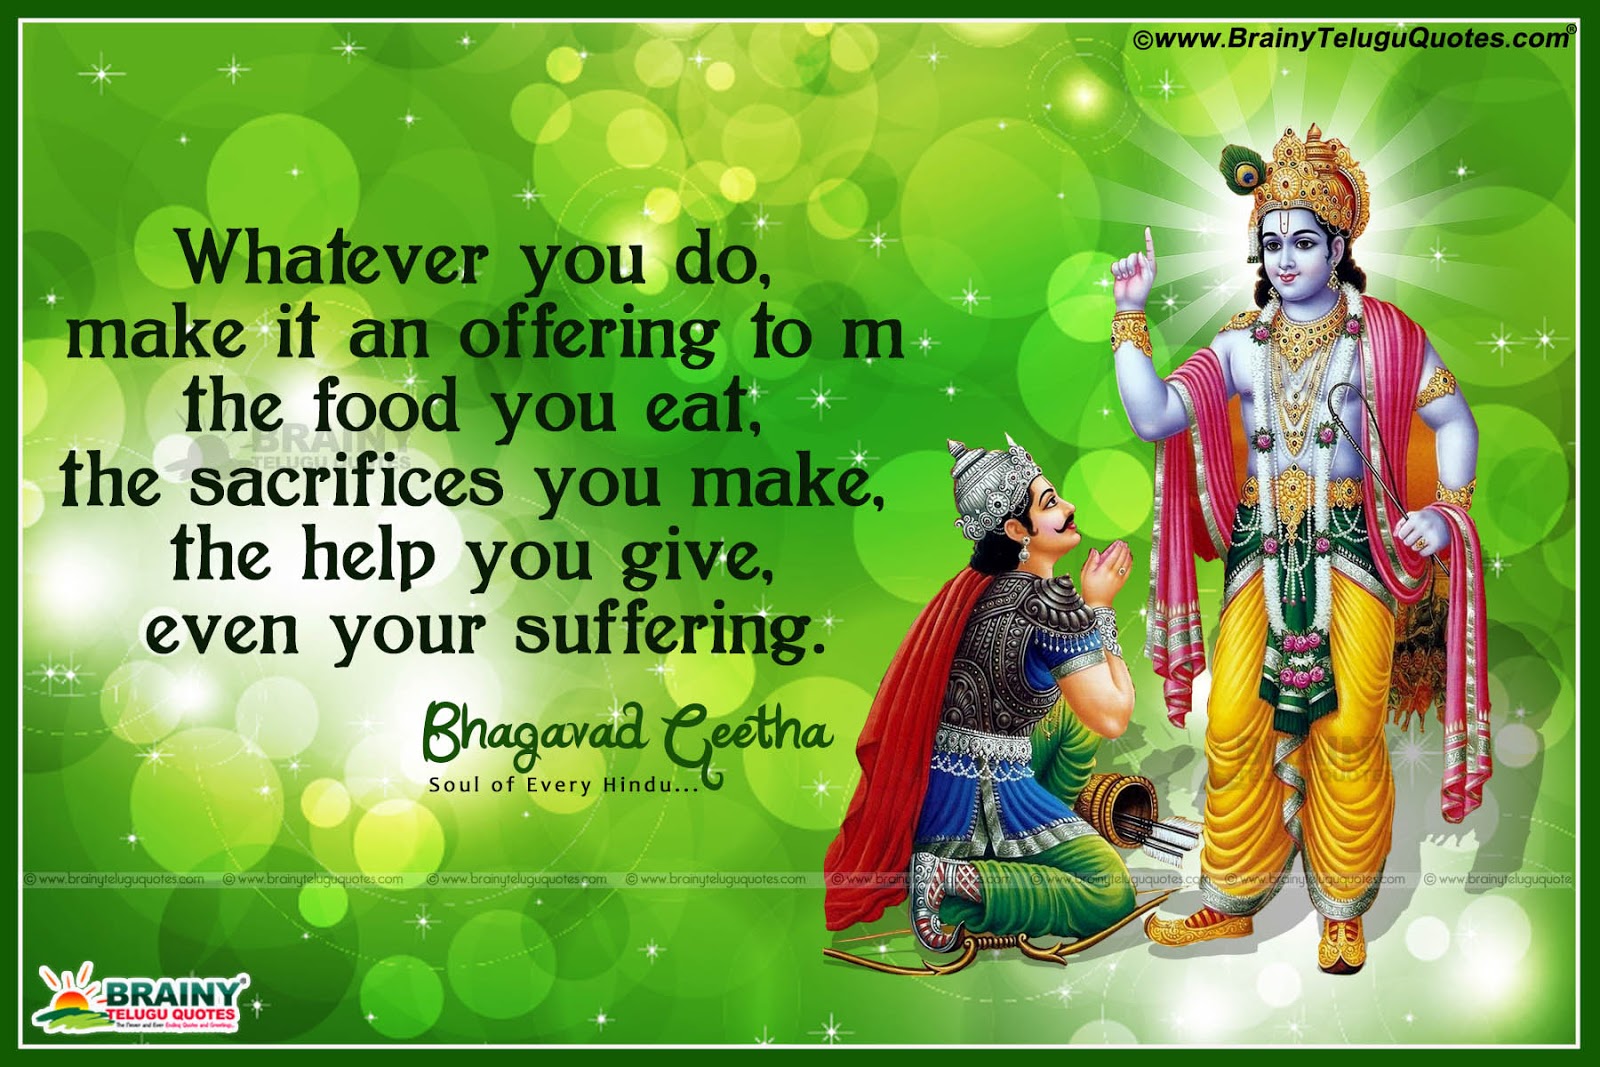 Bhagavad Gita Quotes In English With Pictures Shri Krishna Sayings Quotes Brainyteluguquotes Comtelugu Quotes English Quotes Hindi Quotes Tamil Quotes Greetings